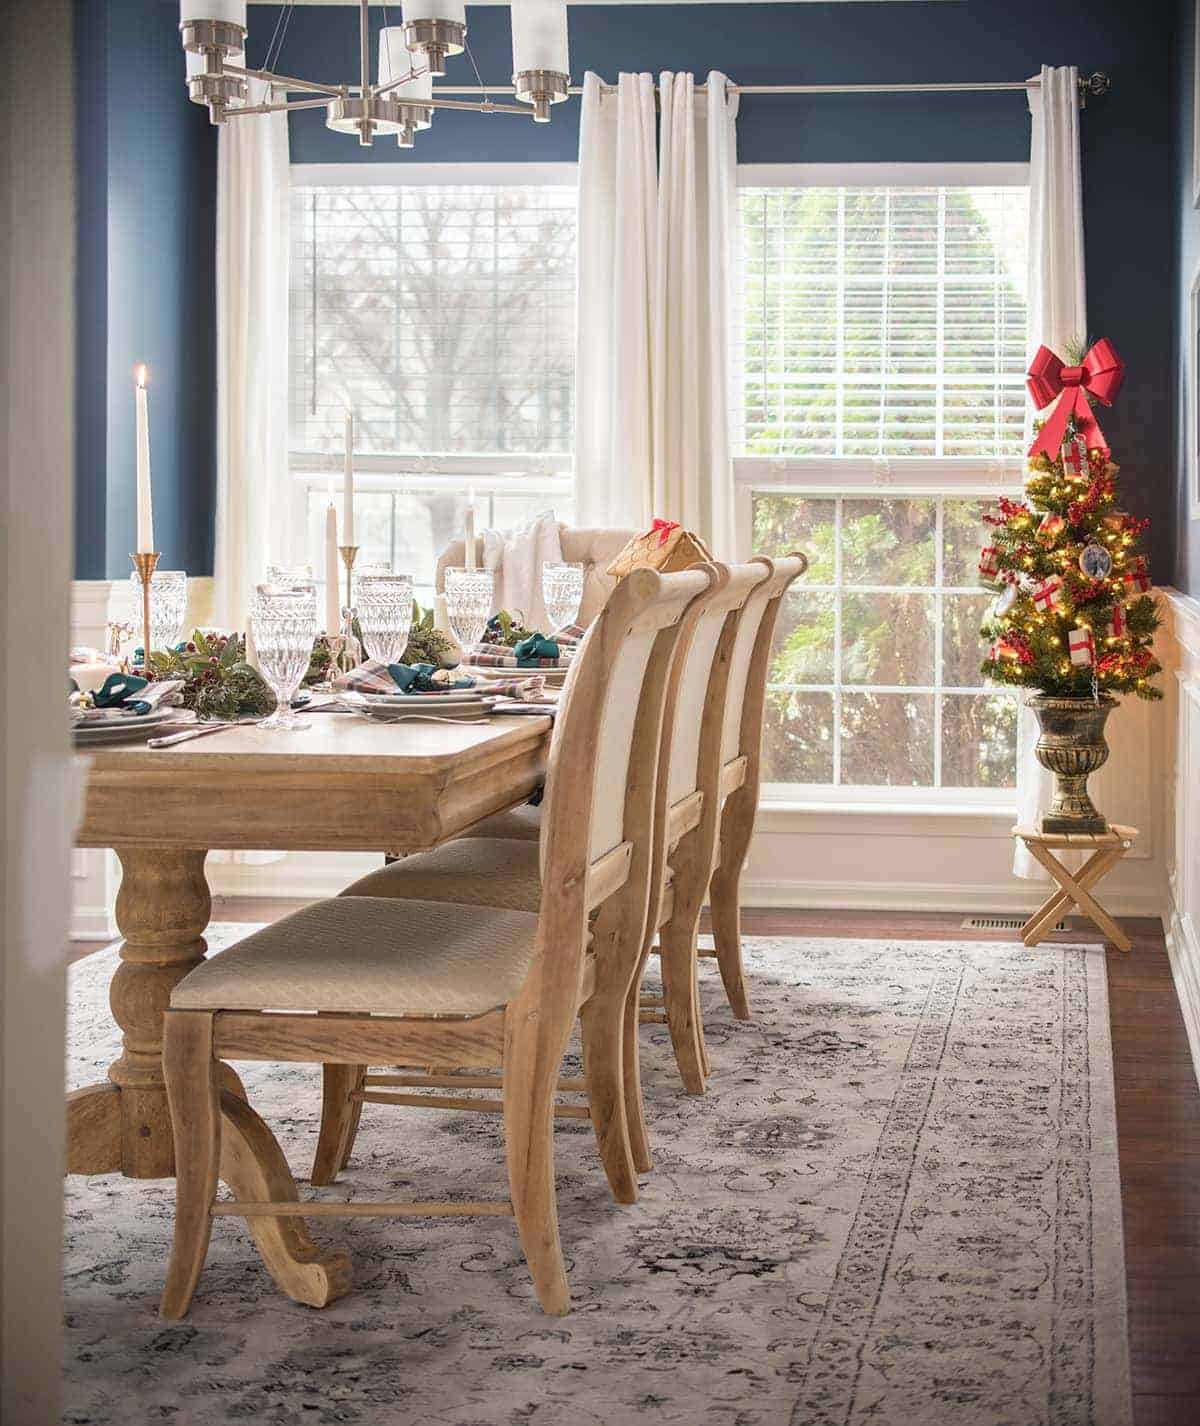 Dining Room table setting at Christmas Time with navy painted walls and dark hardwood floors.